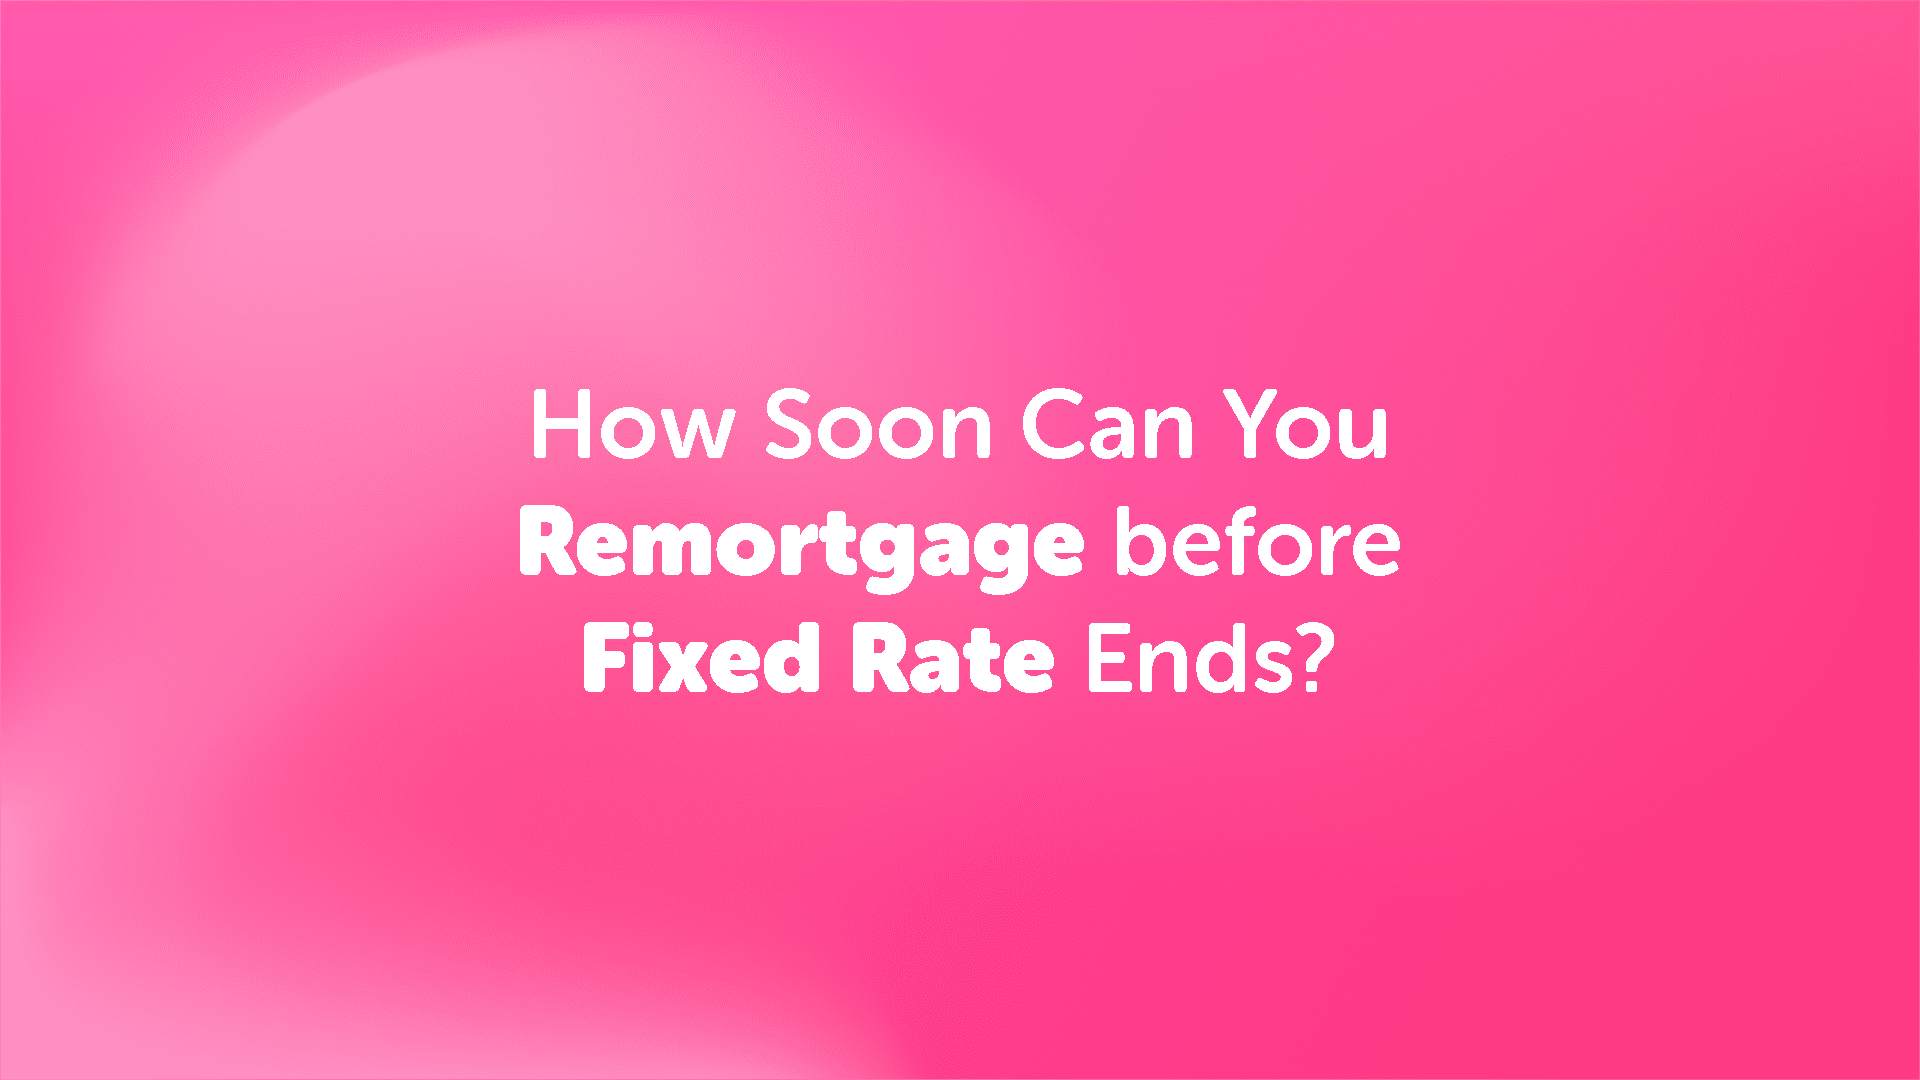 How Soon Can You Remortgage Before Your Fixed Rate Ends